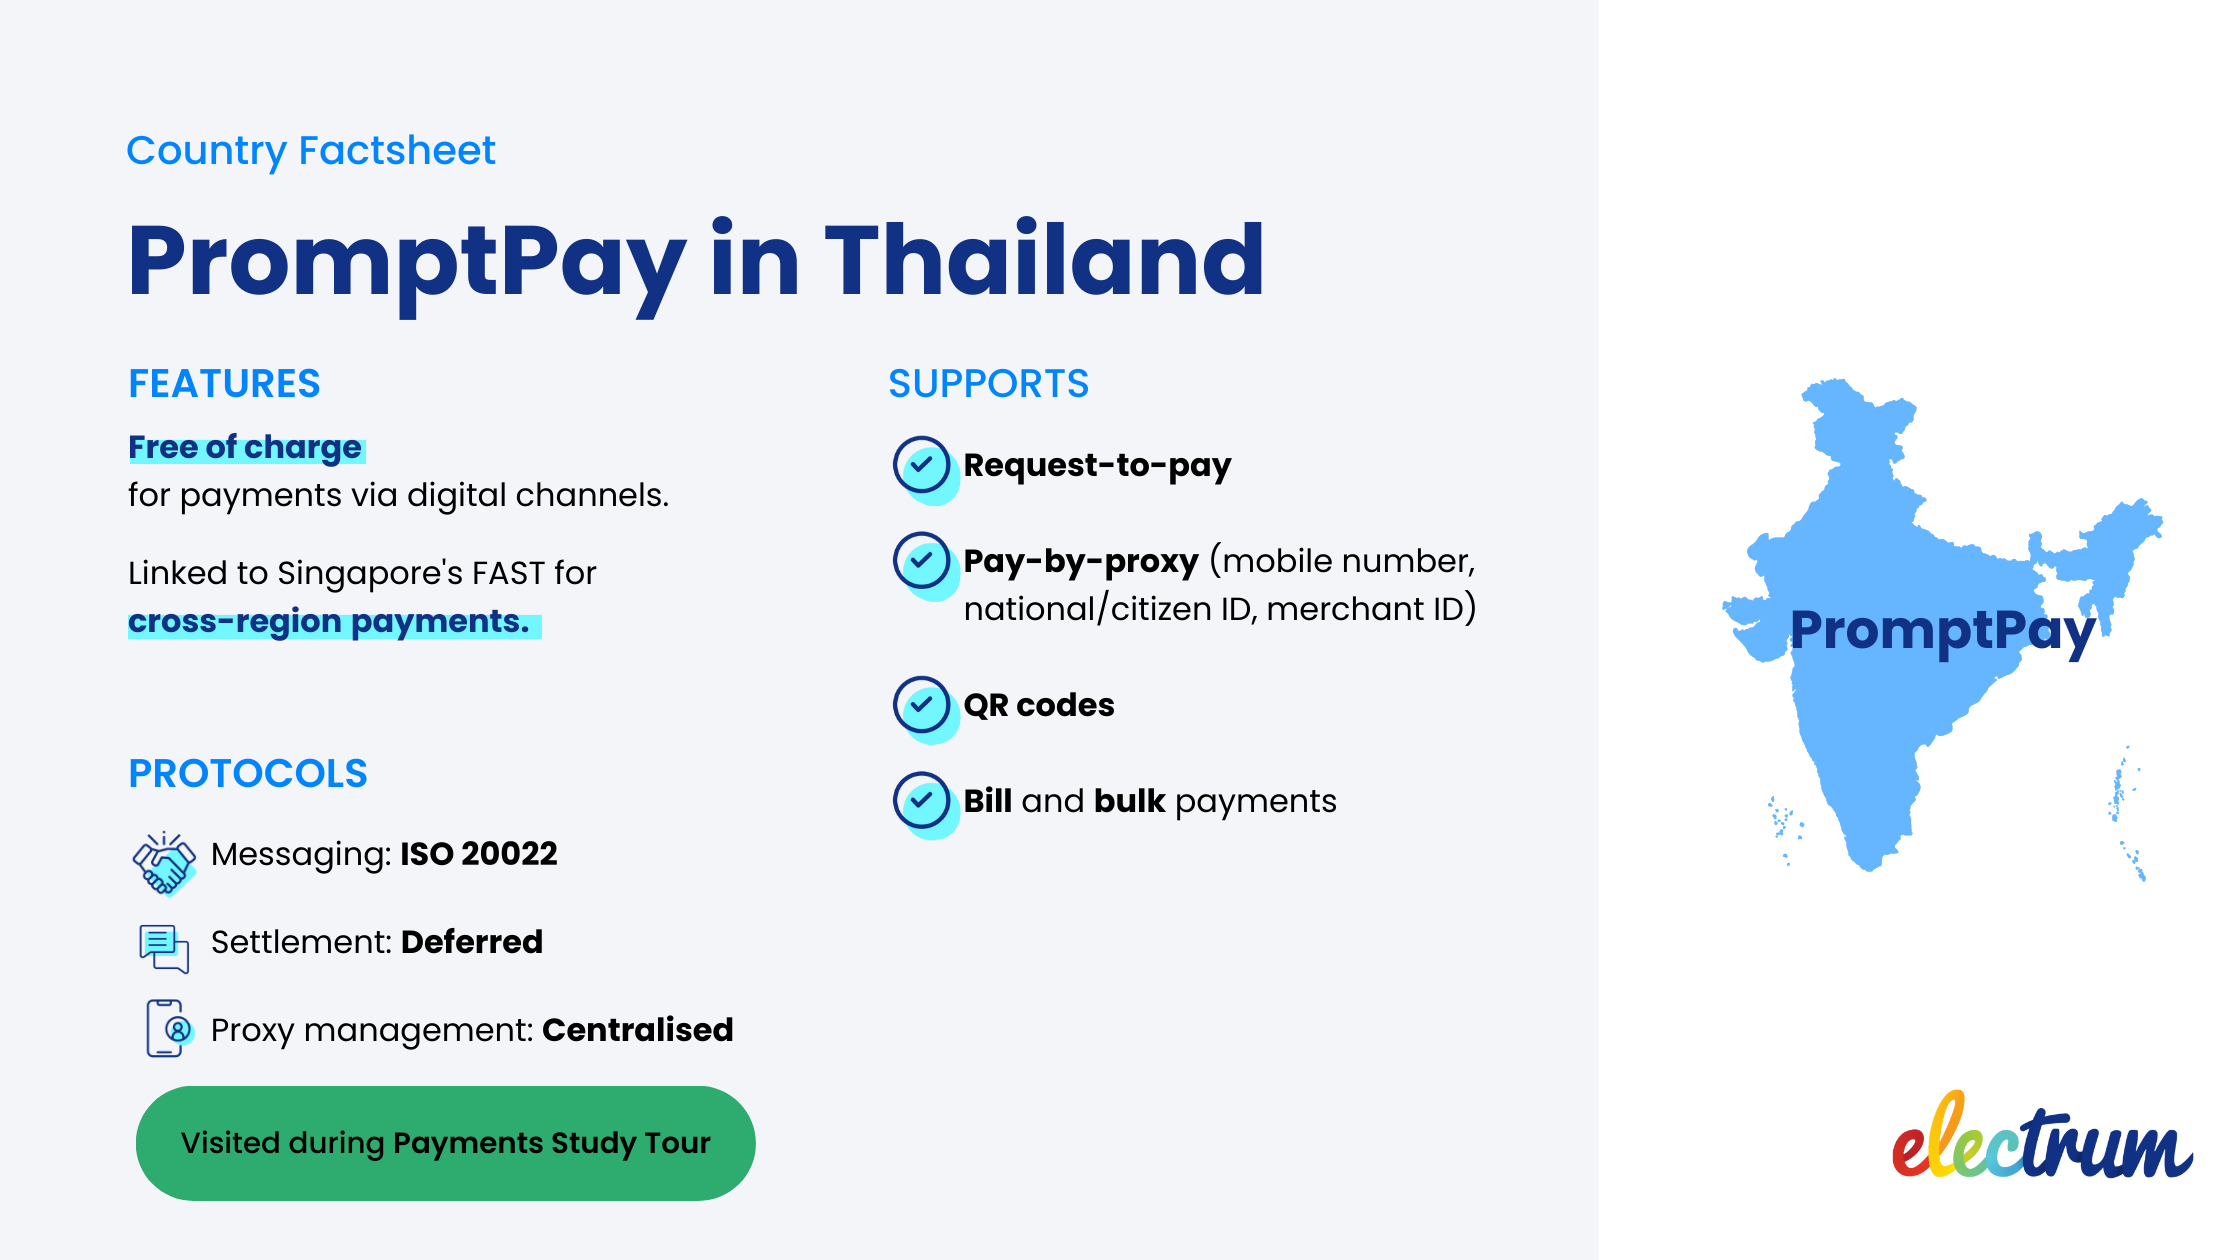 Factsheet summarising the PromptPay system in Thailand